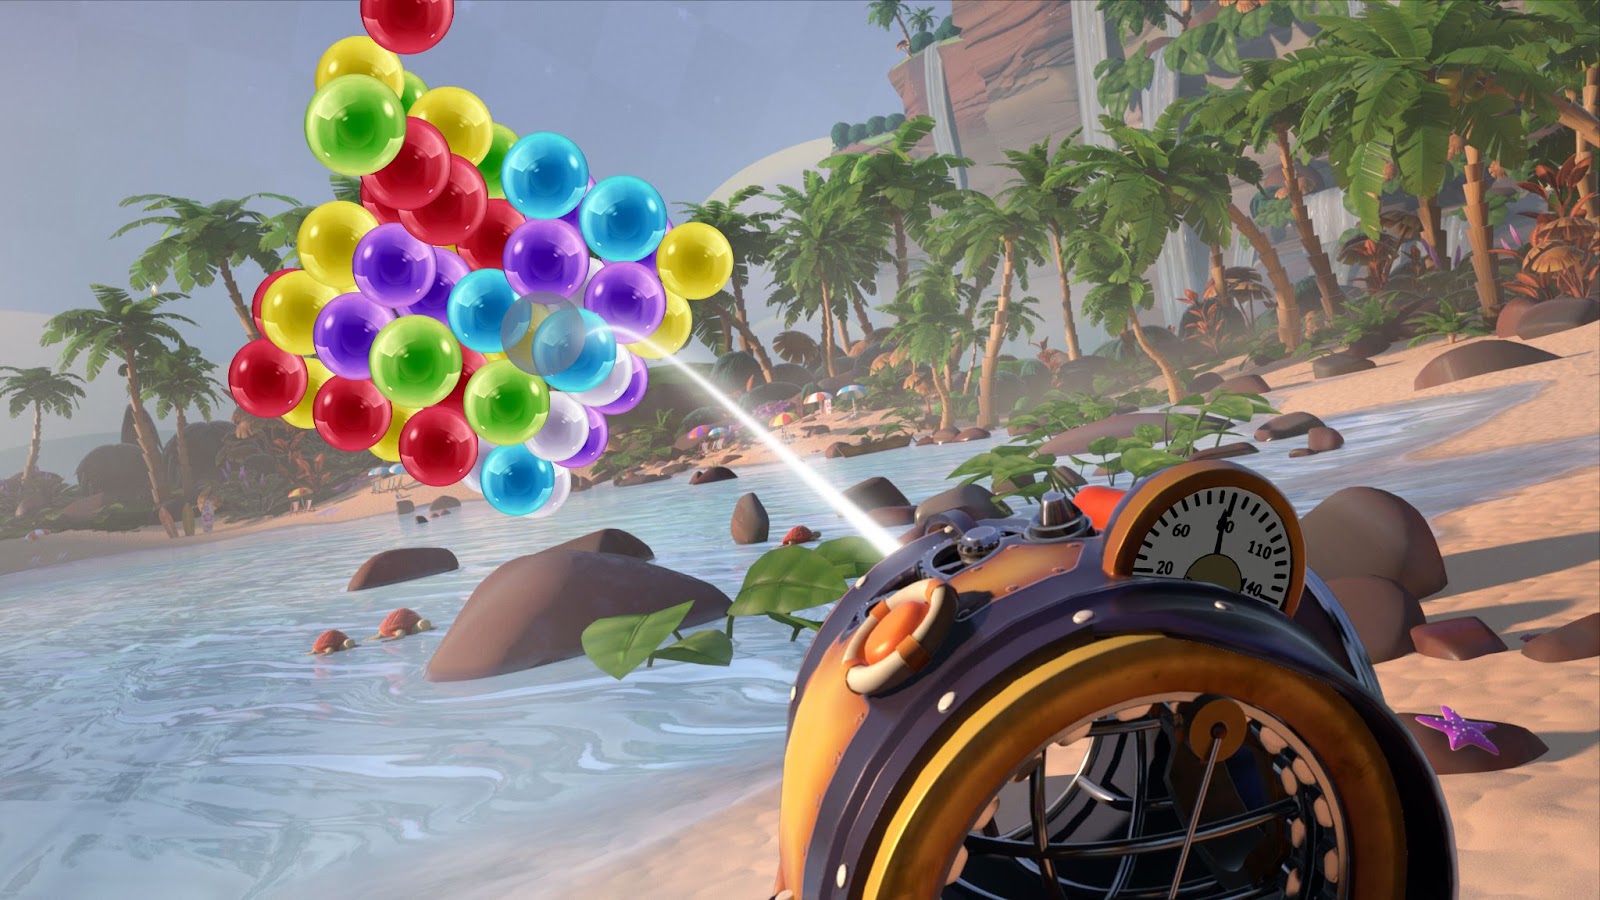 A level depicting a sandy beach, with a glorious blue sea. Colourful bubbles are in the air, a player is trying to pop them.